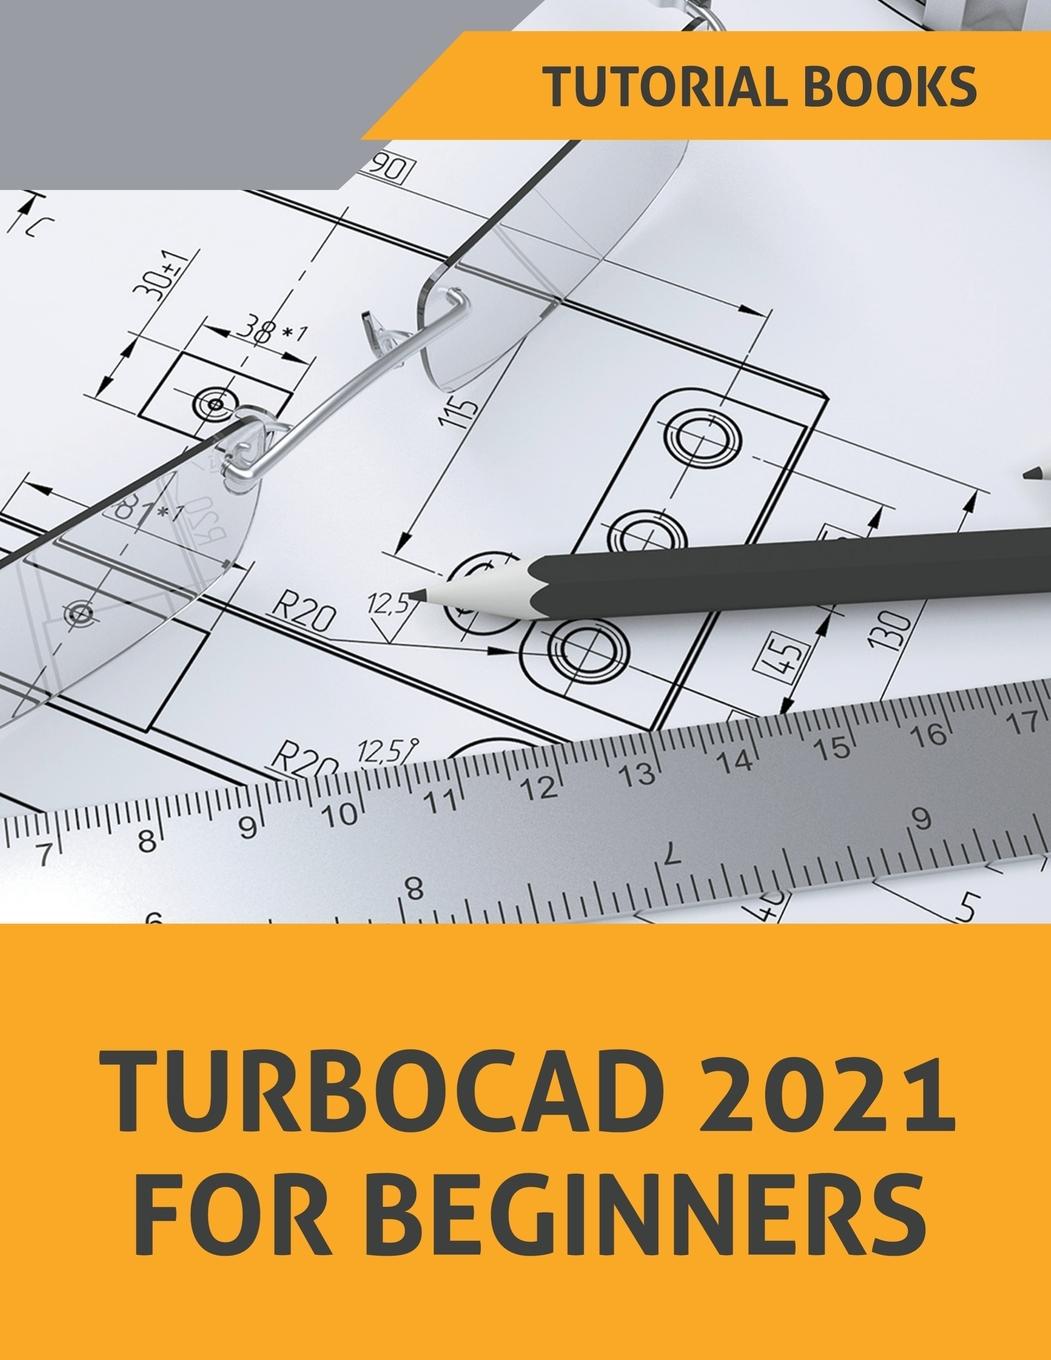 Book TurboCAD 2021 For Beginners 